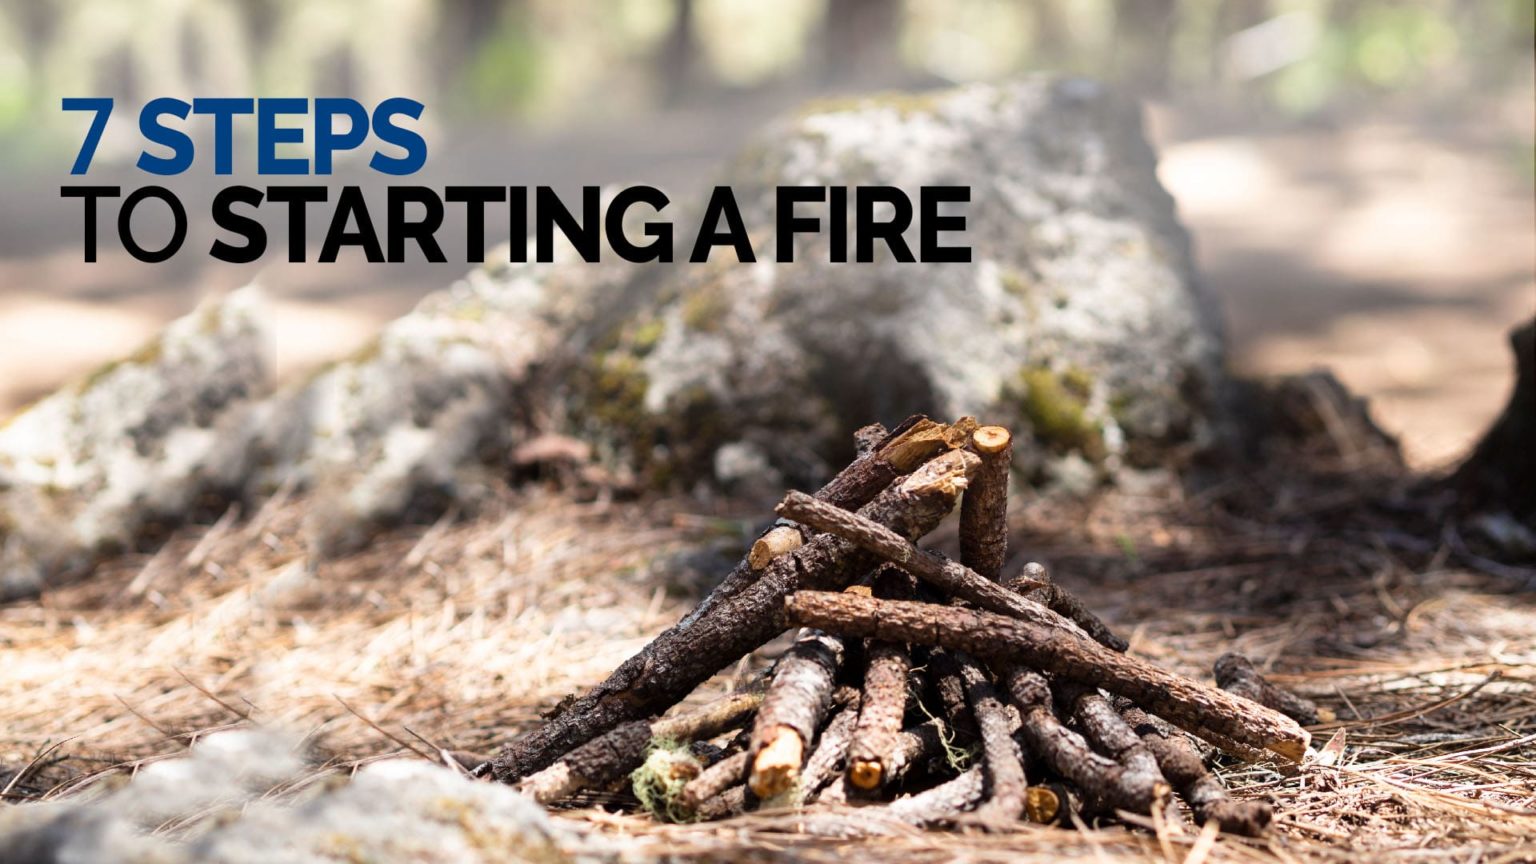 7 steps to starting a fire